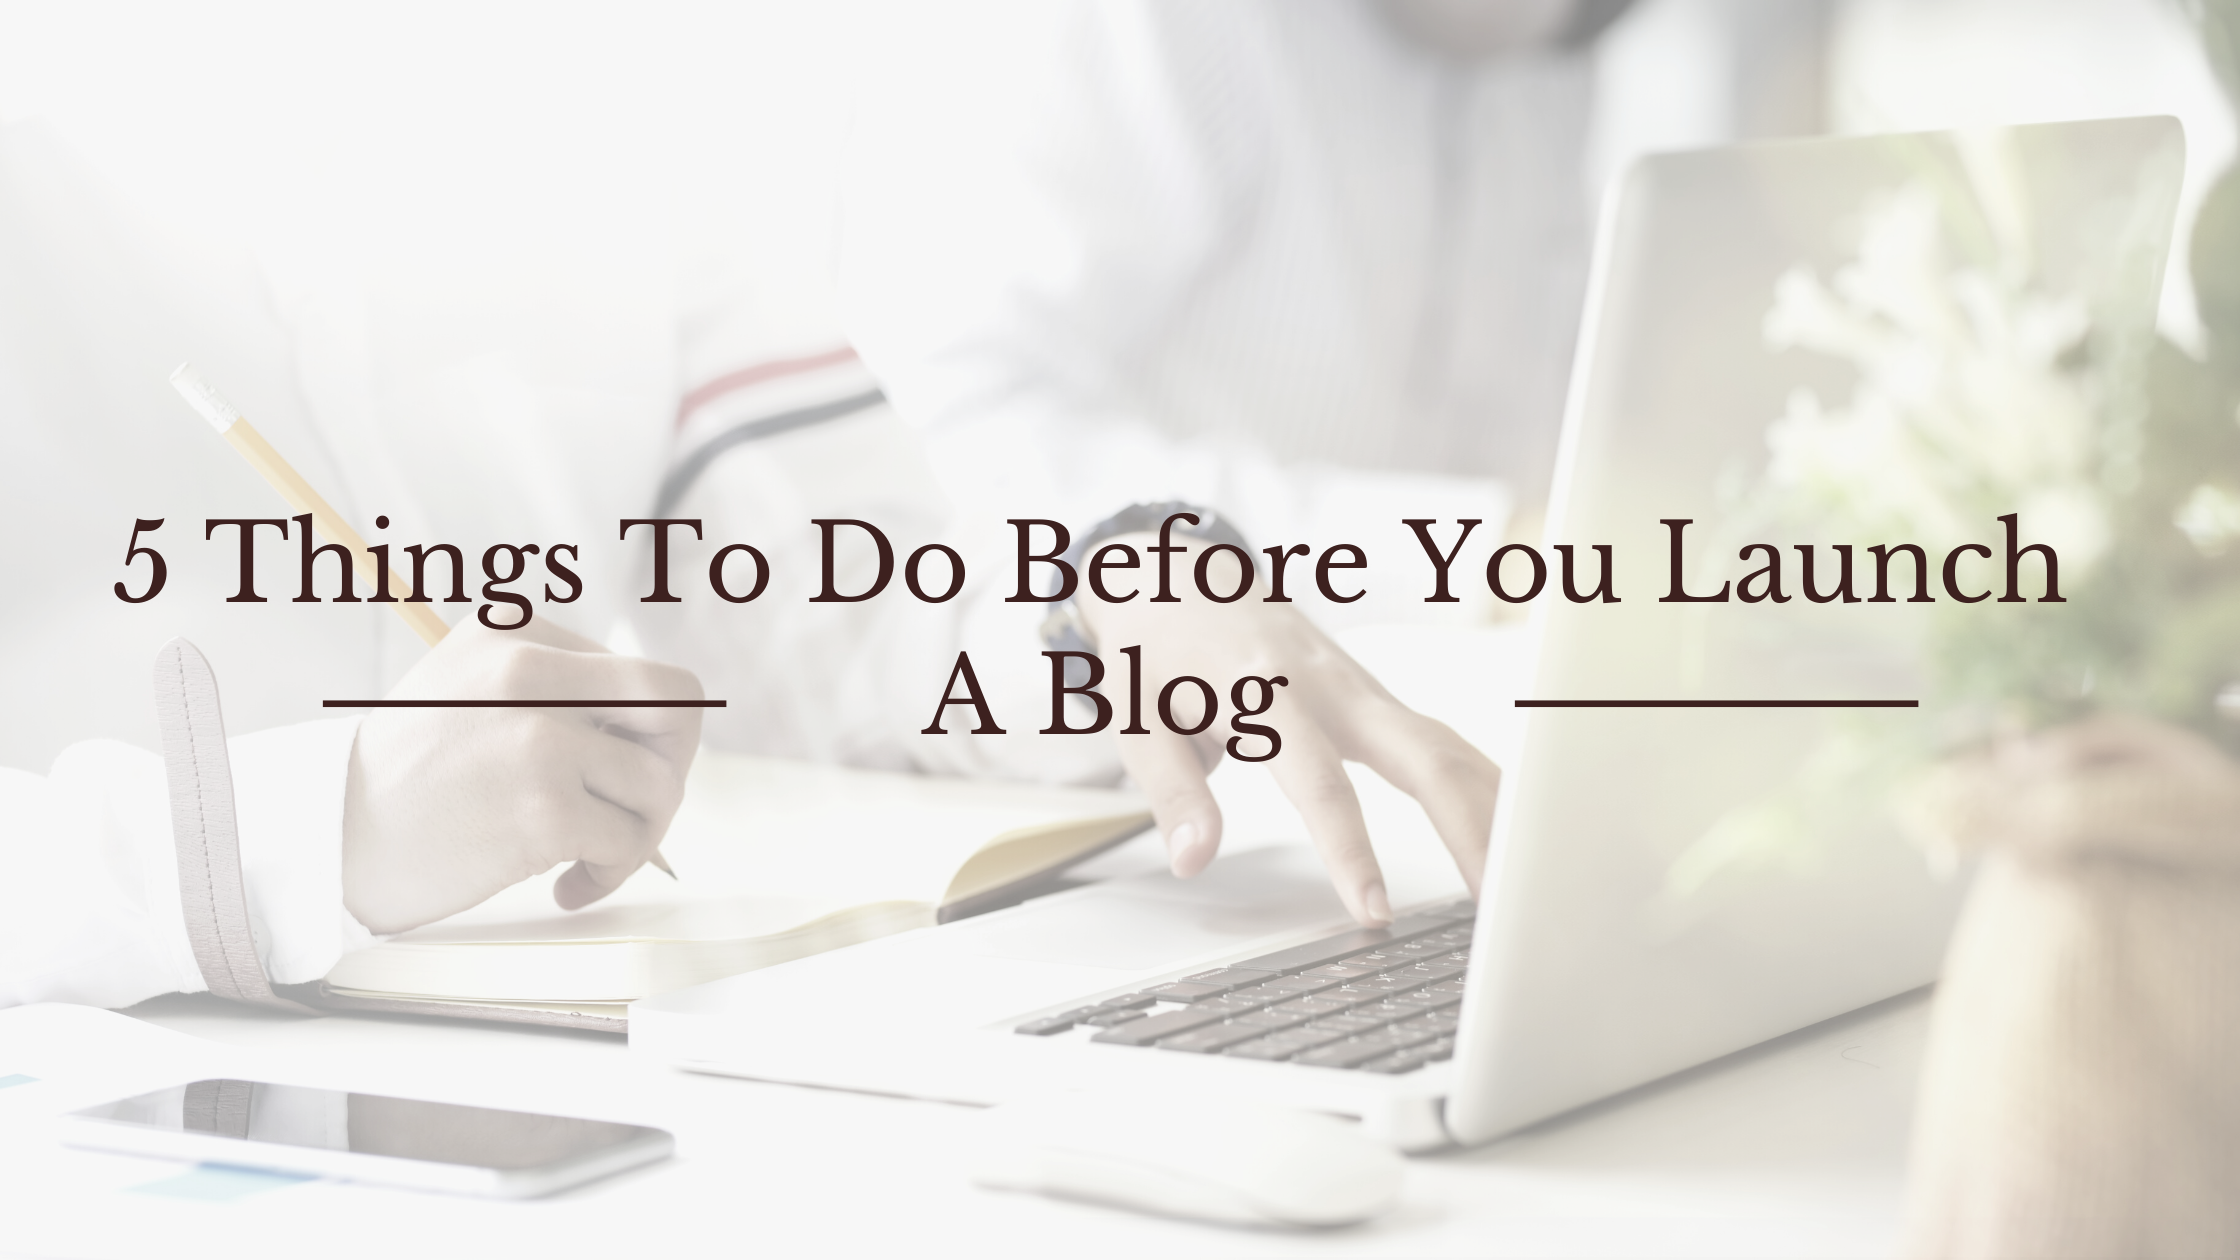 5 Important Things To Do Before You Launch A Blog